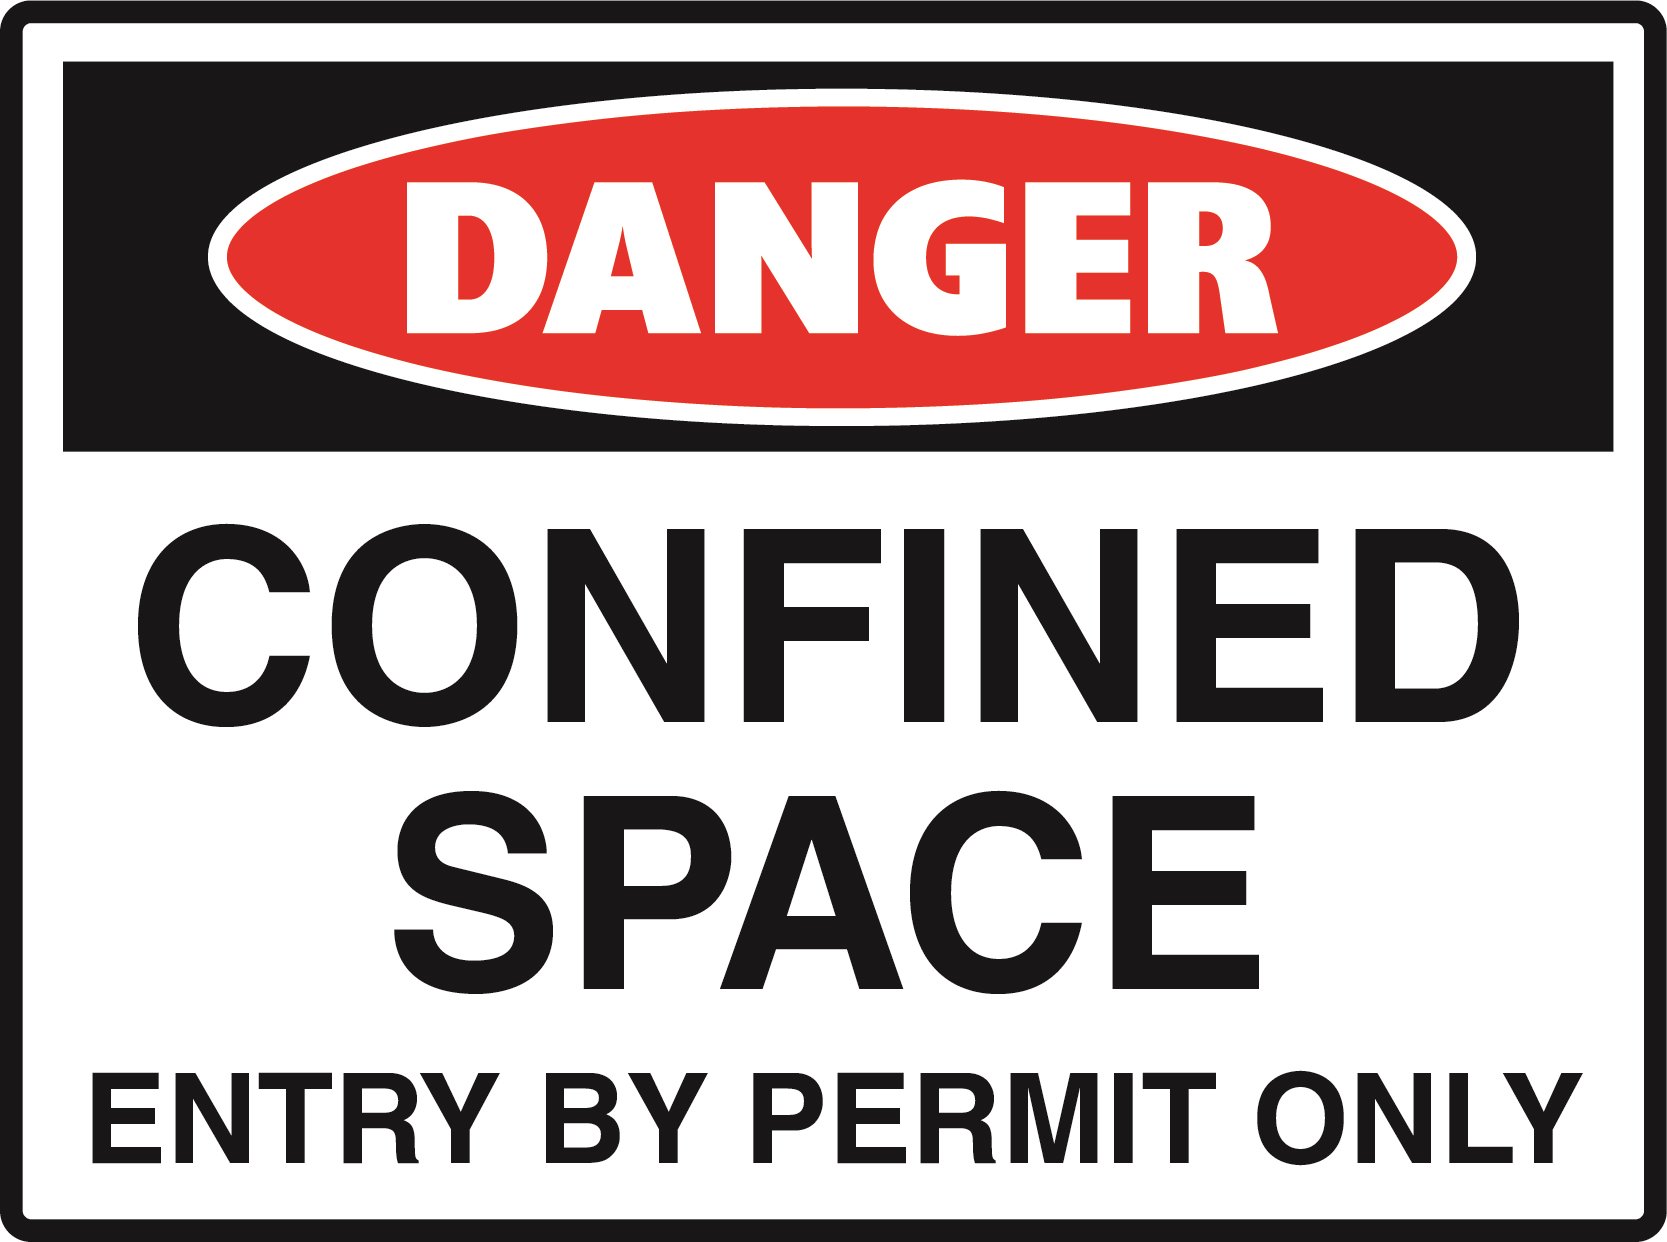 Danger - Confined Space - Entry by Permit Only